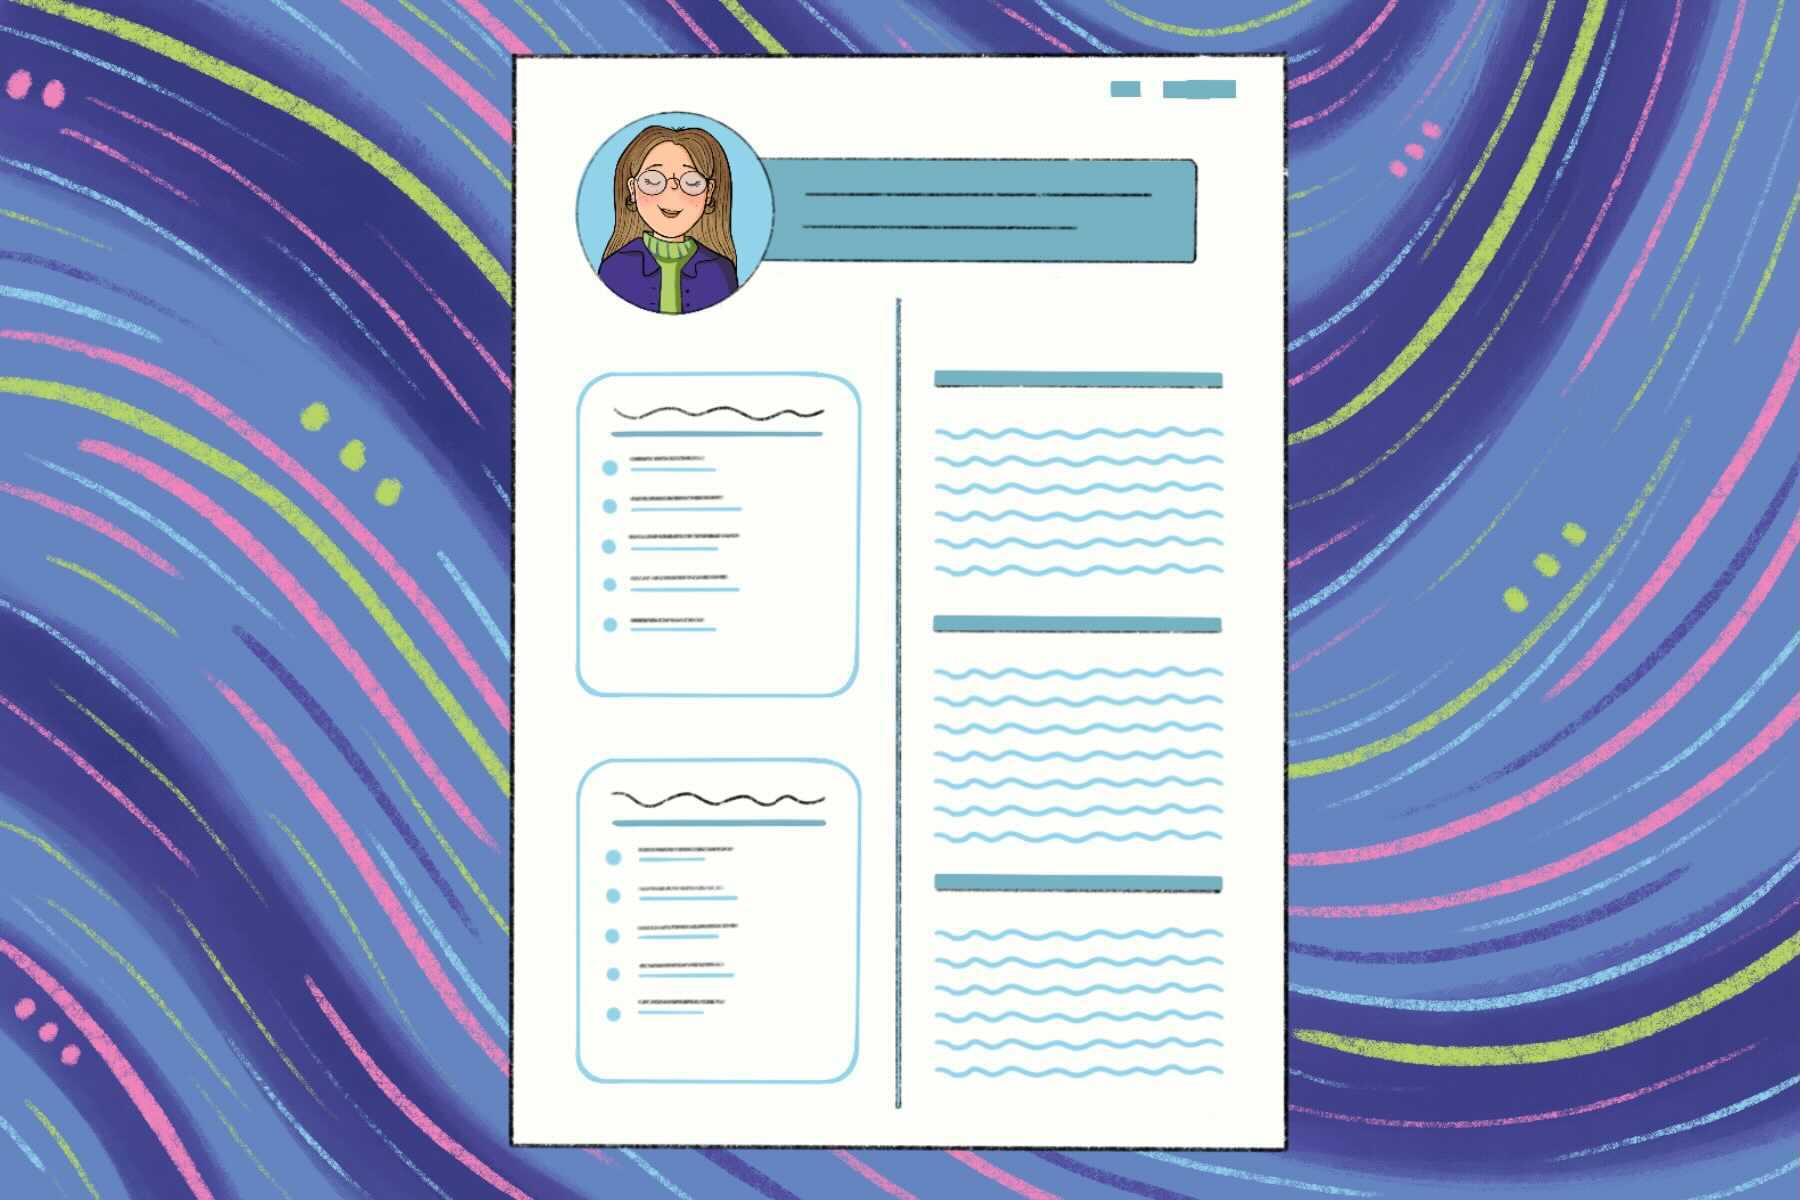 An illustration of a full resume to accompany an article about taking online courses to boost your resume.